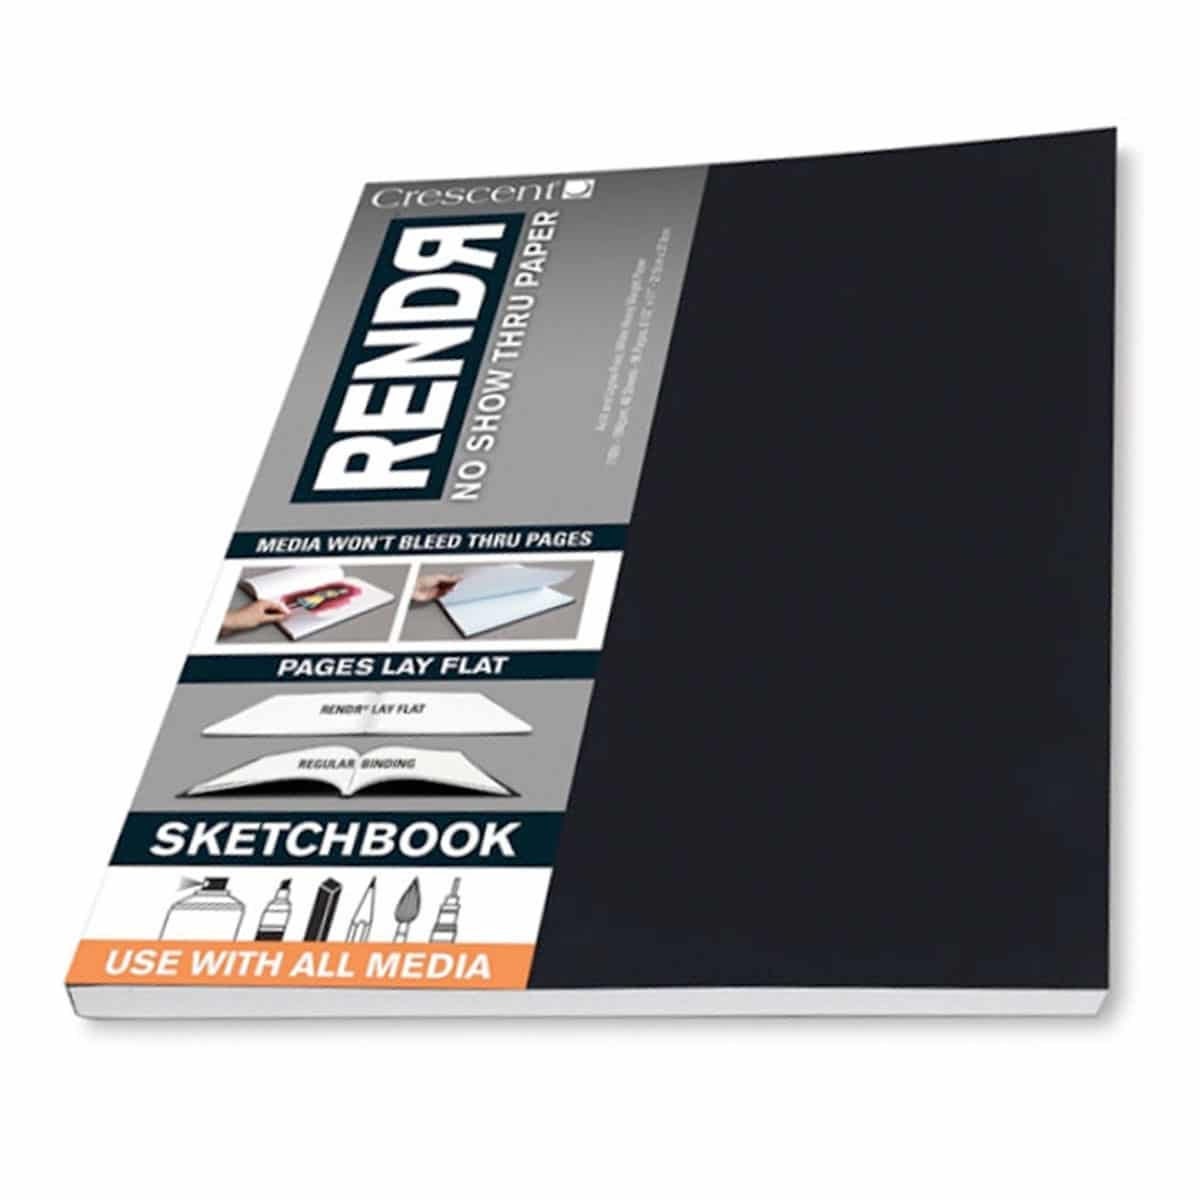 RENDR Marker Books & Drawing Paper 8 Sizes 